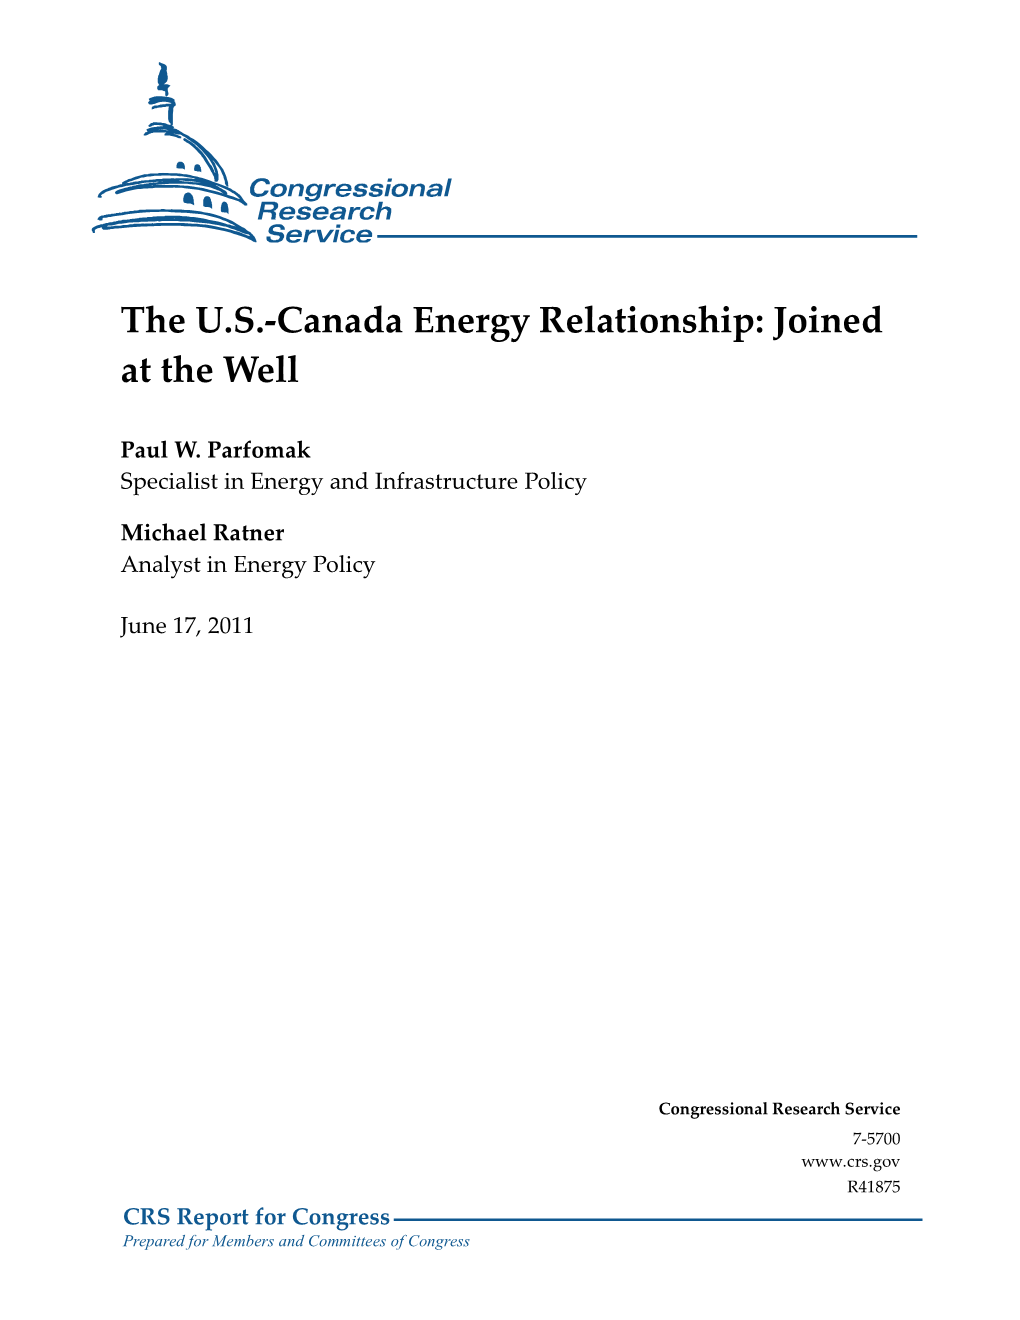 The U.S.-Canada Energy Relationship: Joined at the Well